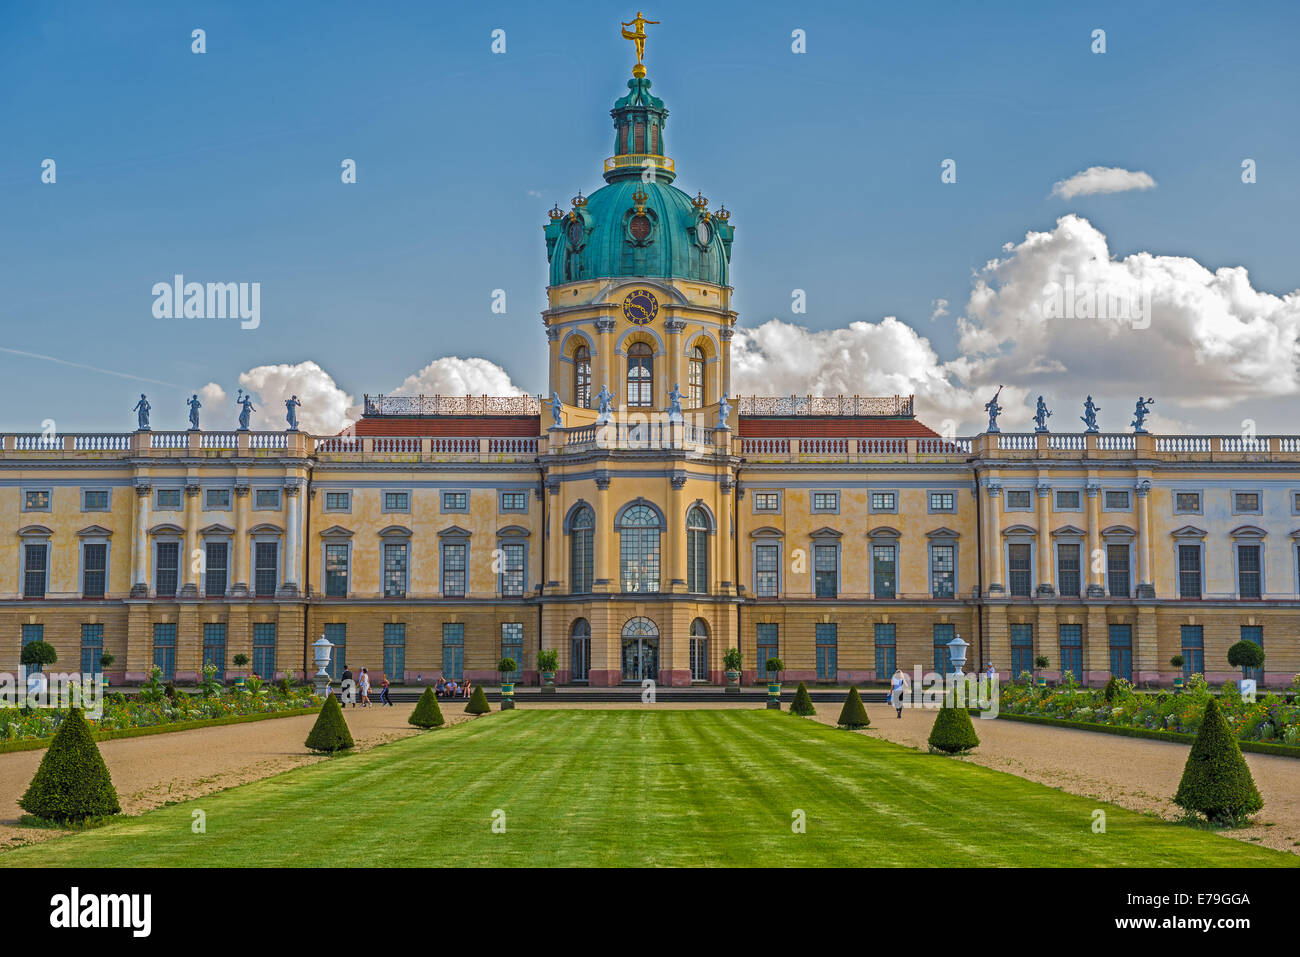 Schloss Charlottenburg (Charlottenburg Palace) with garden in Berlin. It is the largest palace and the only surviving royal resi Stock Photo